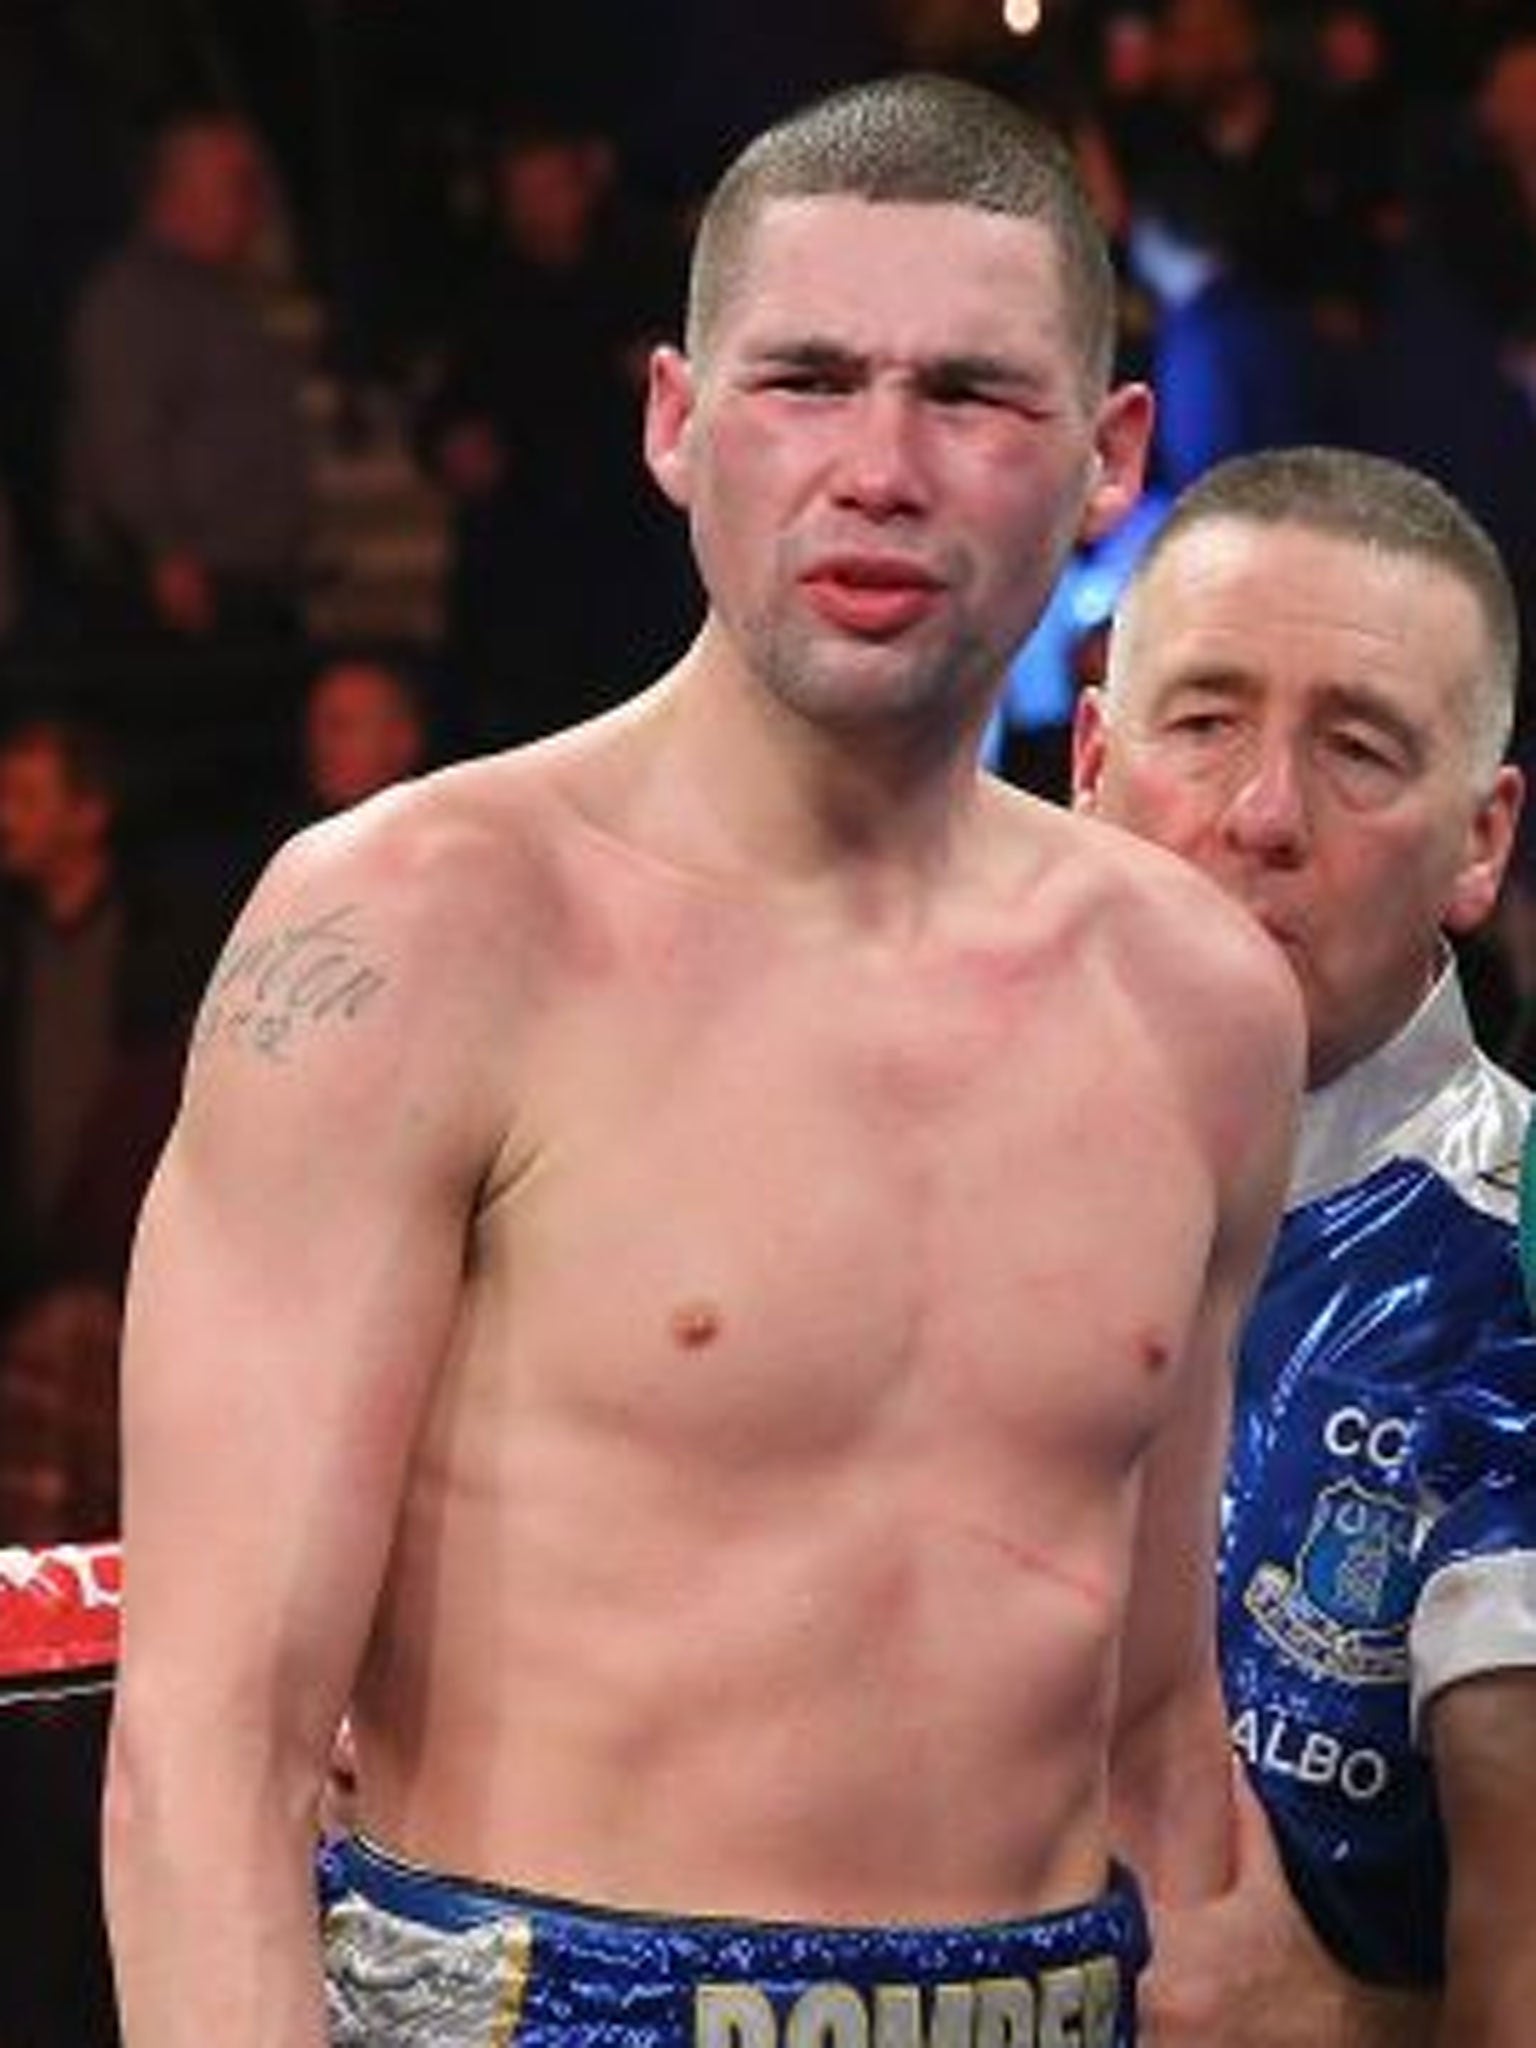 Tony Bellew admitted easing off on his opponent midfight